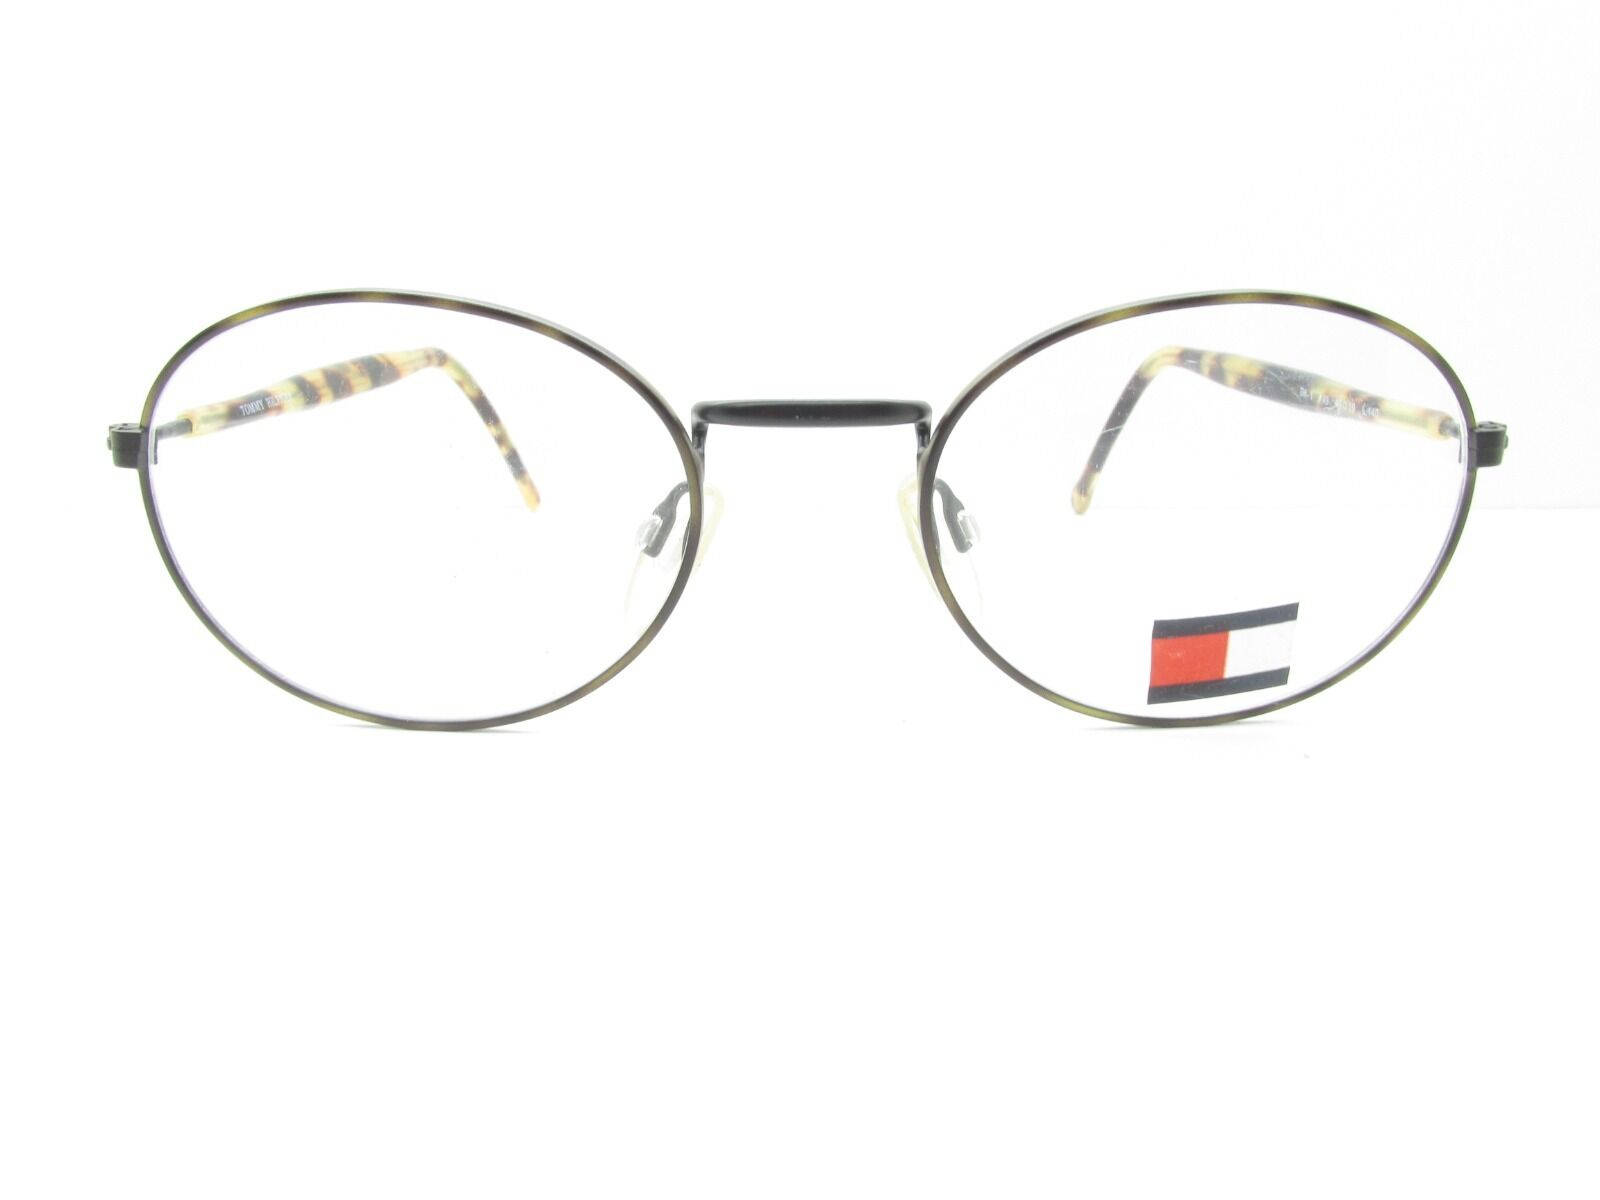 Tommyhilfiger Tk103 078 Óculos: This Sentence Is Not Related To Computer Or Mobile Wallpapers, As It Is Referring To Eyeglasses. However, A Possible Translation Of This Sentence To Portuguese Would Be 